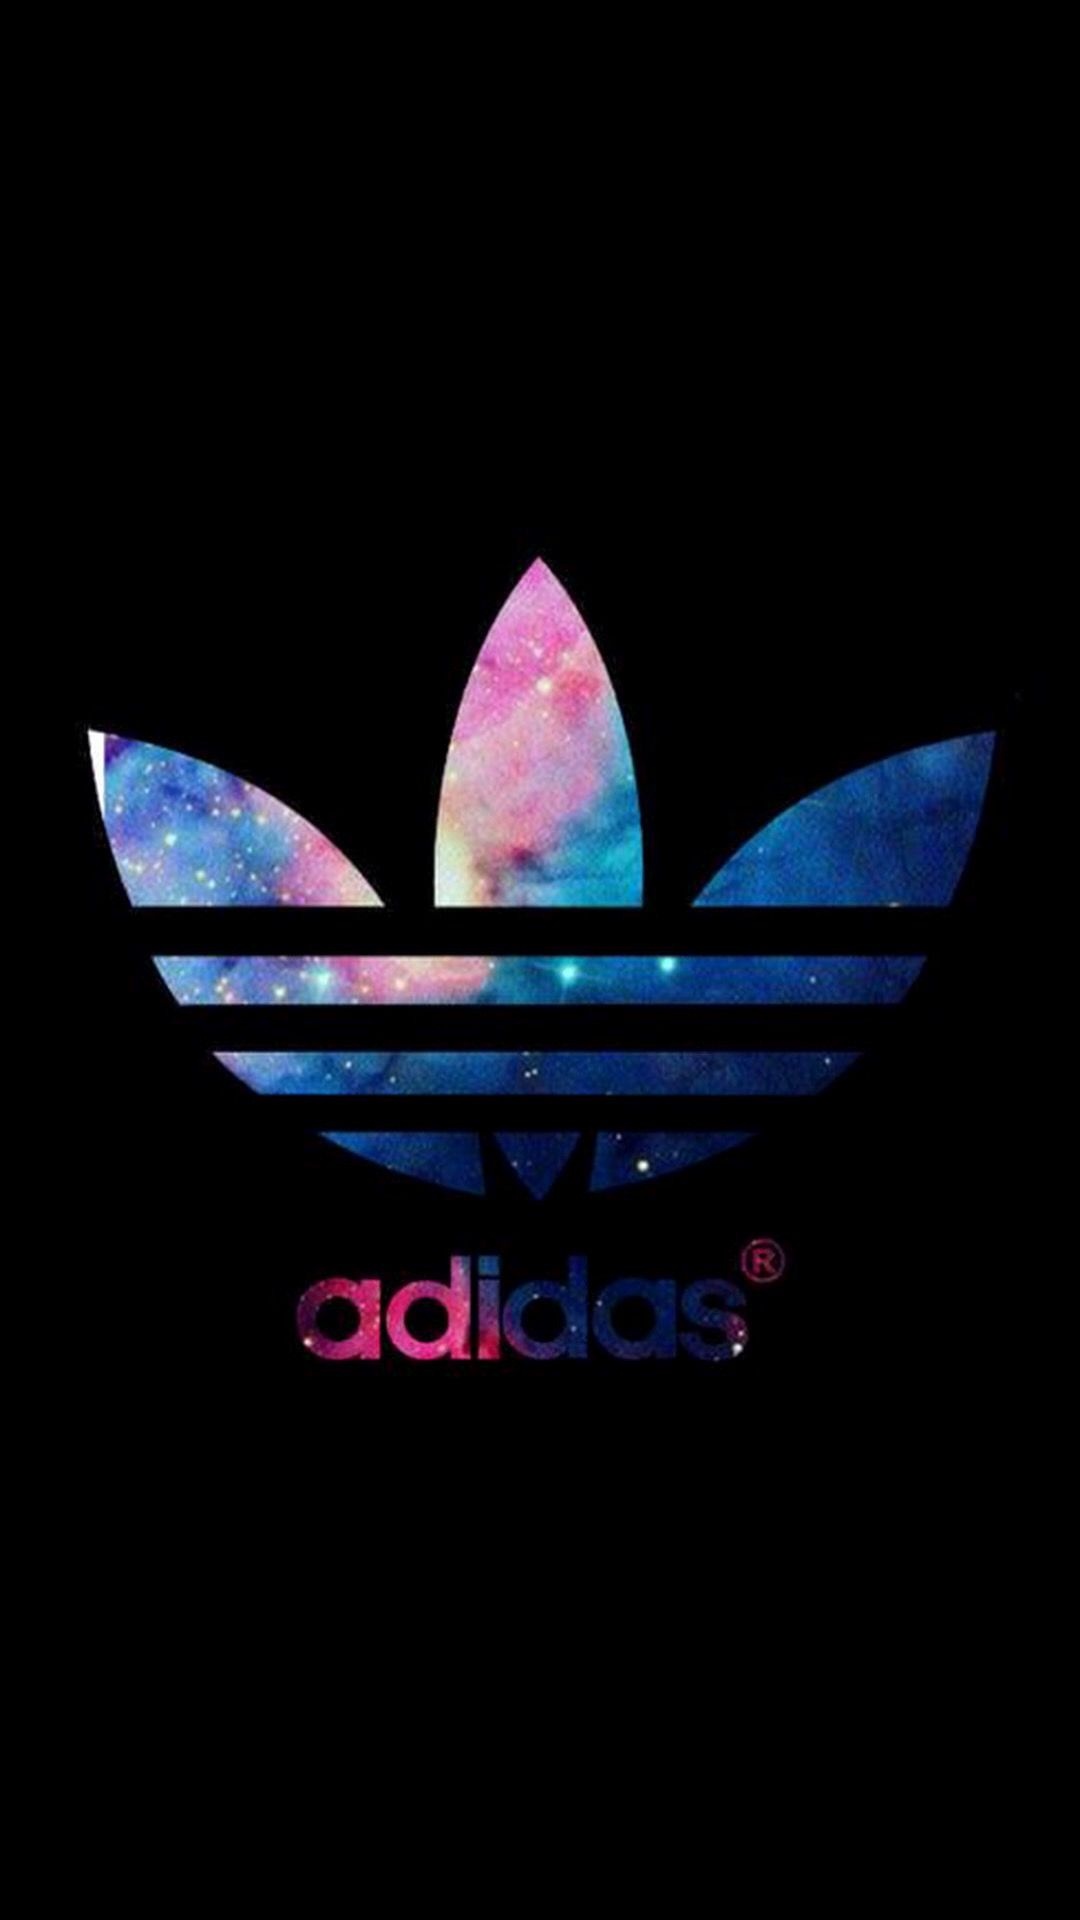 Adidas logo, New wallpaper, Exclusive offers, Brand promotion, 1080x1920 Full HD Phone